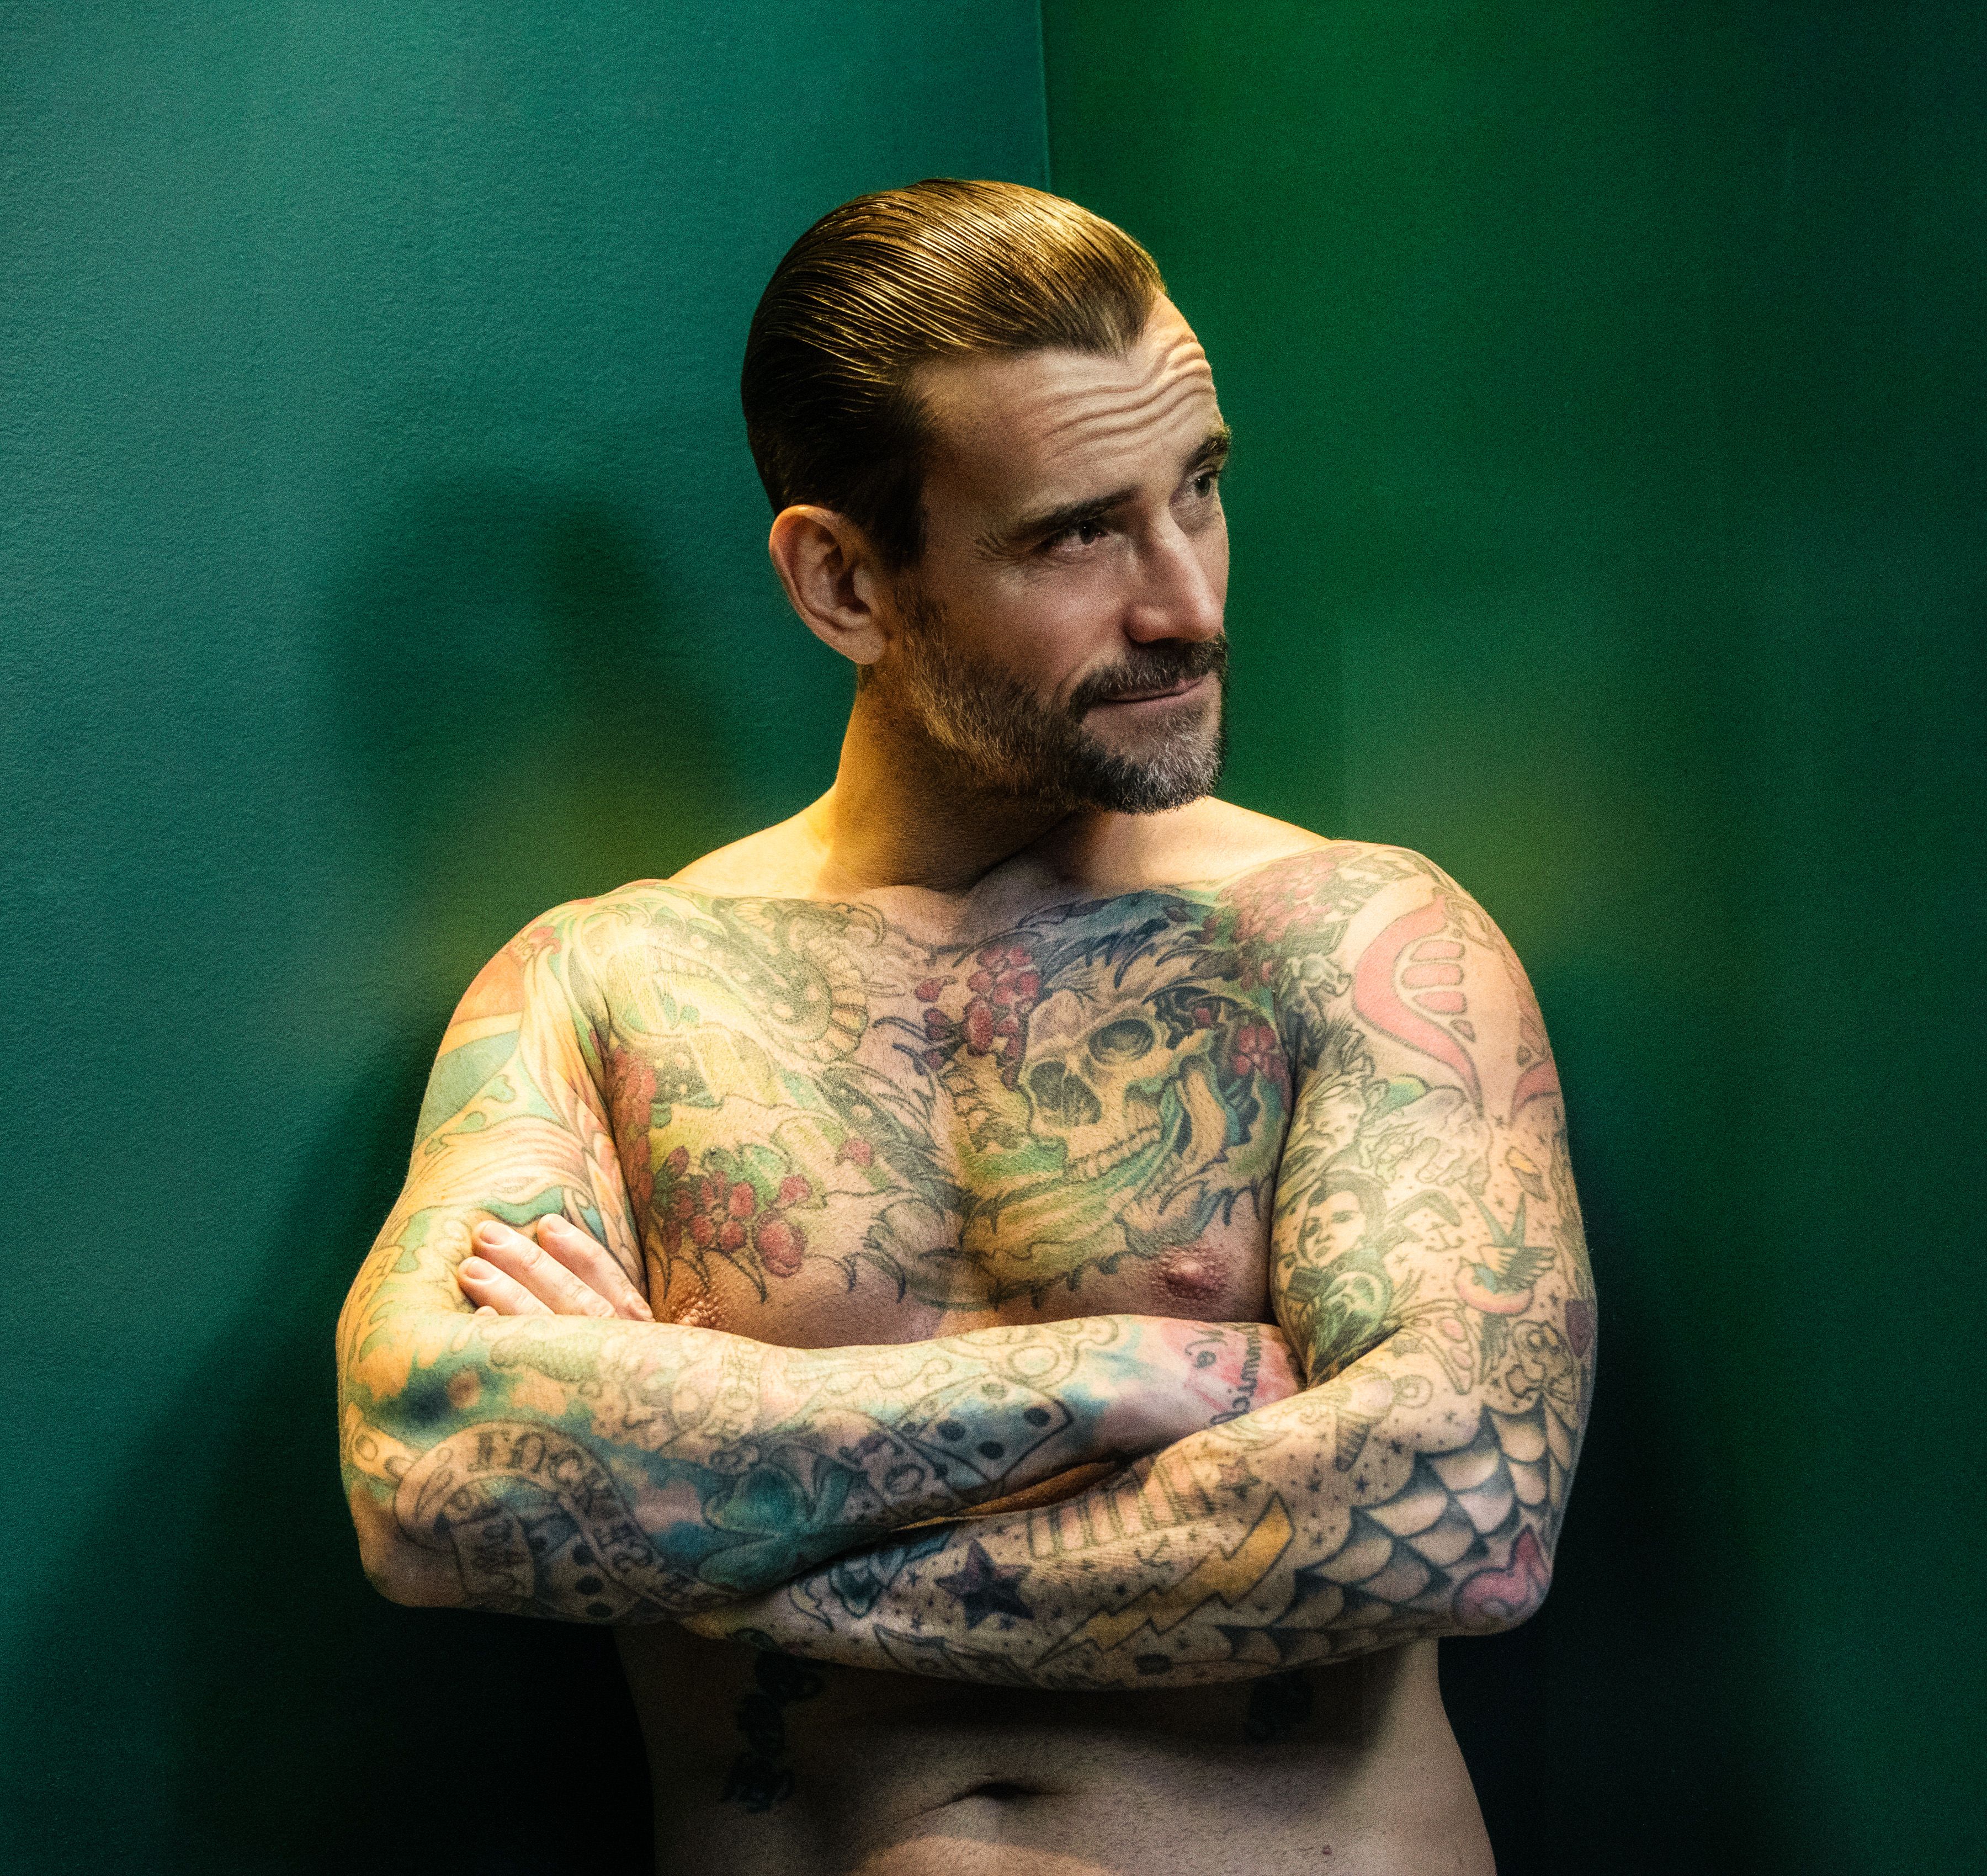 CM Punk Talks AEW, Fallout From WWE, His Childhood, Wife